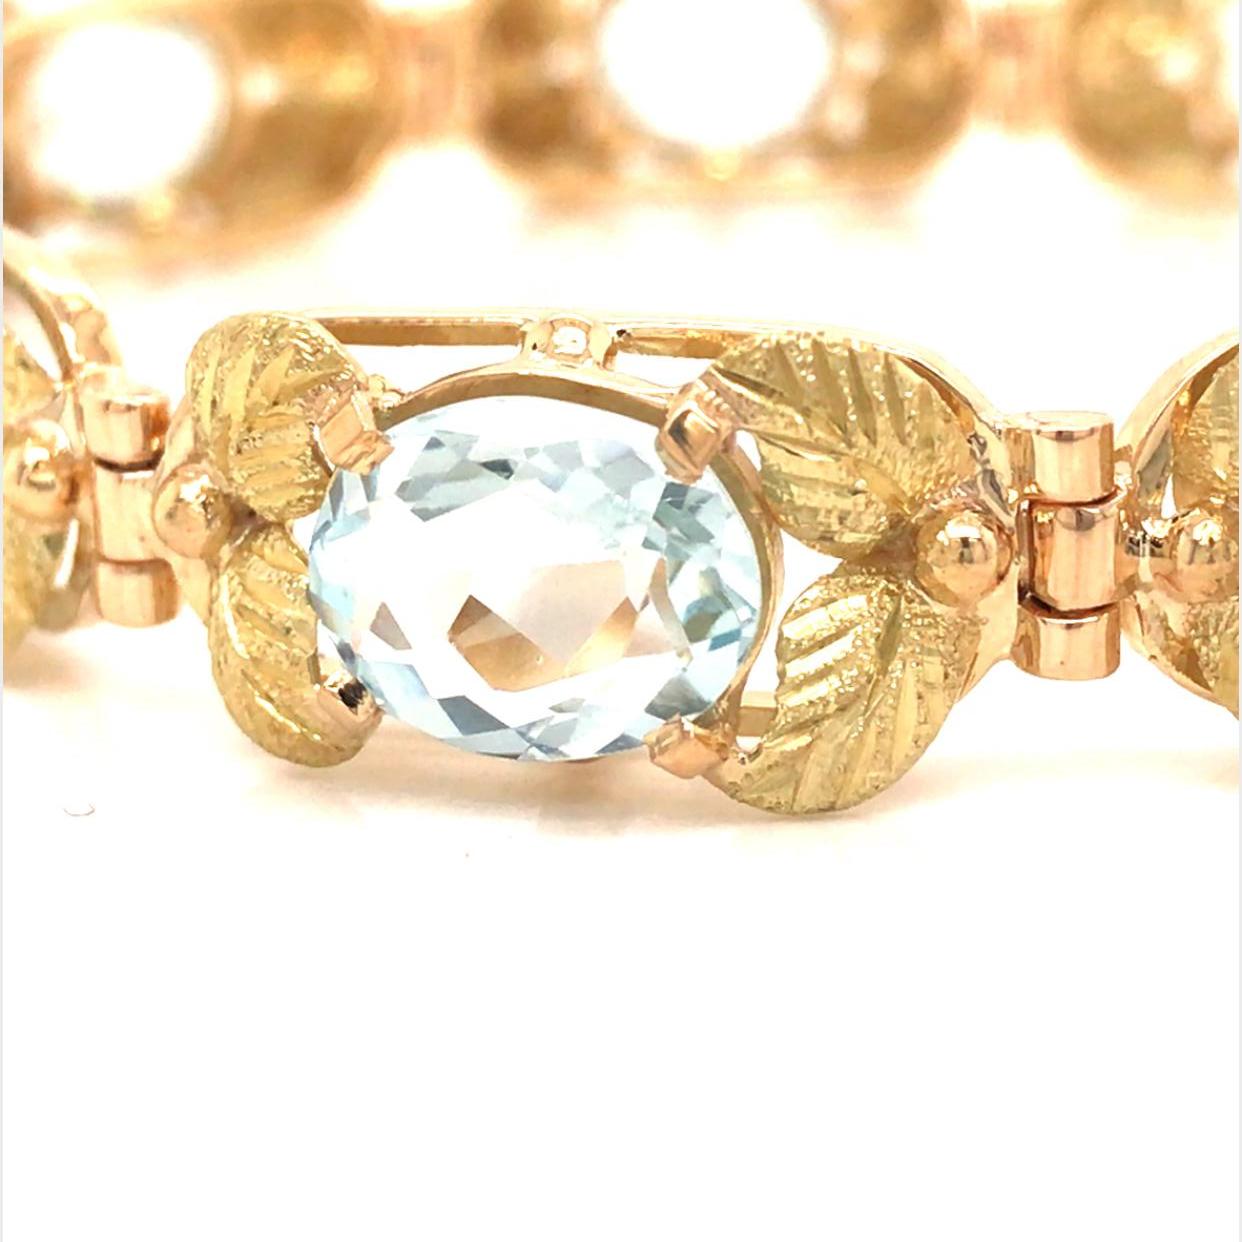 H Stern 18K Aqua Link Bracelet Yellow Gold In Good Condition For Sale In Boca Raton, FL